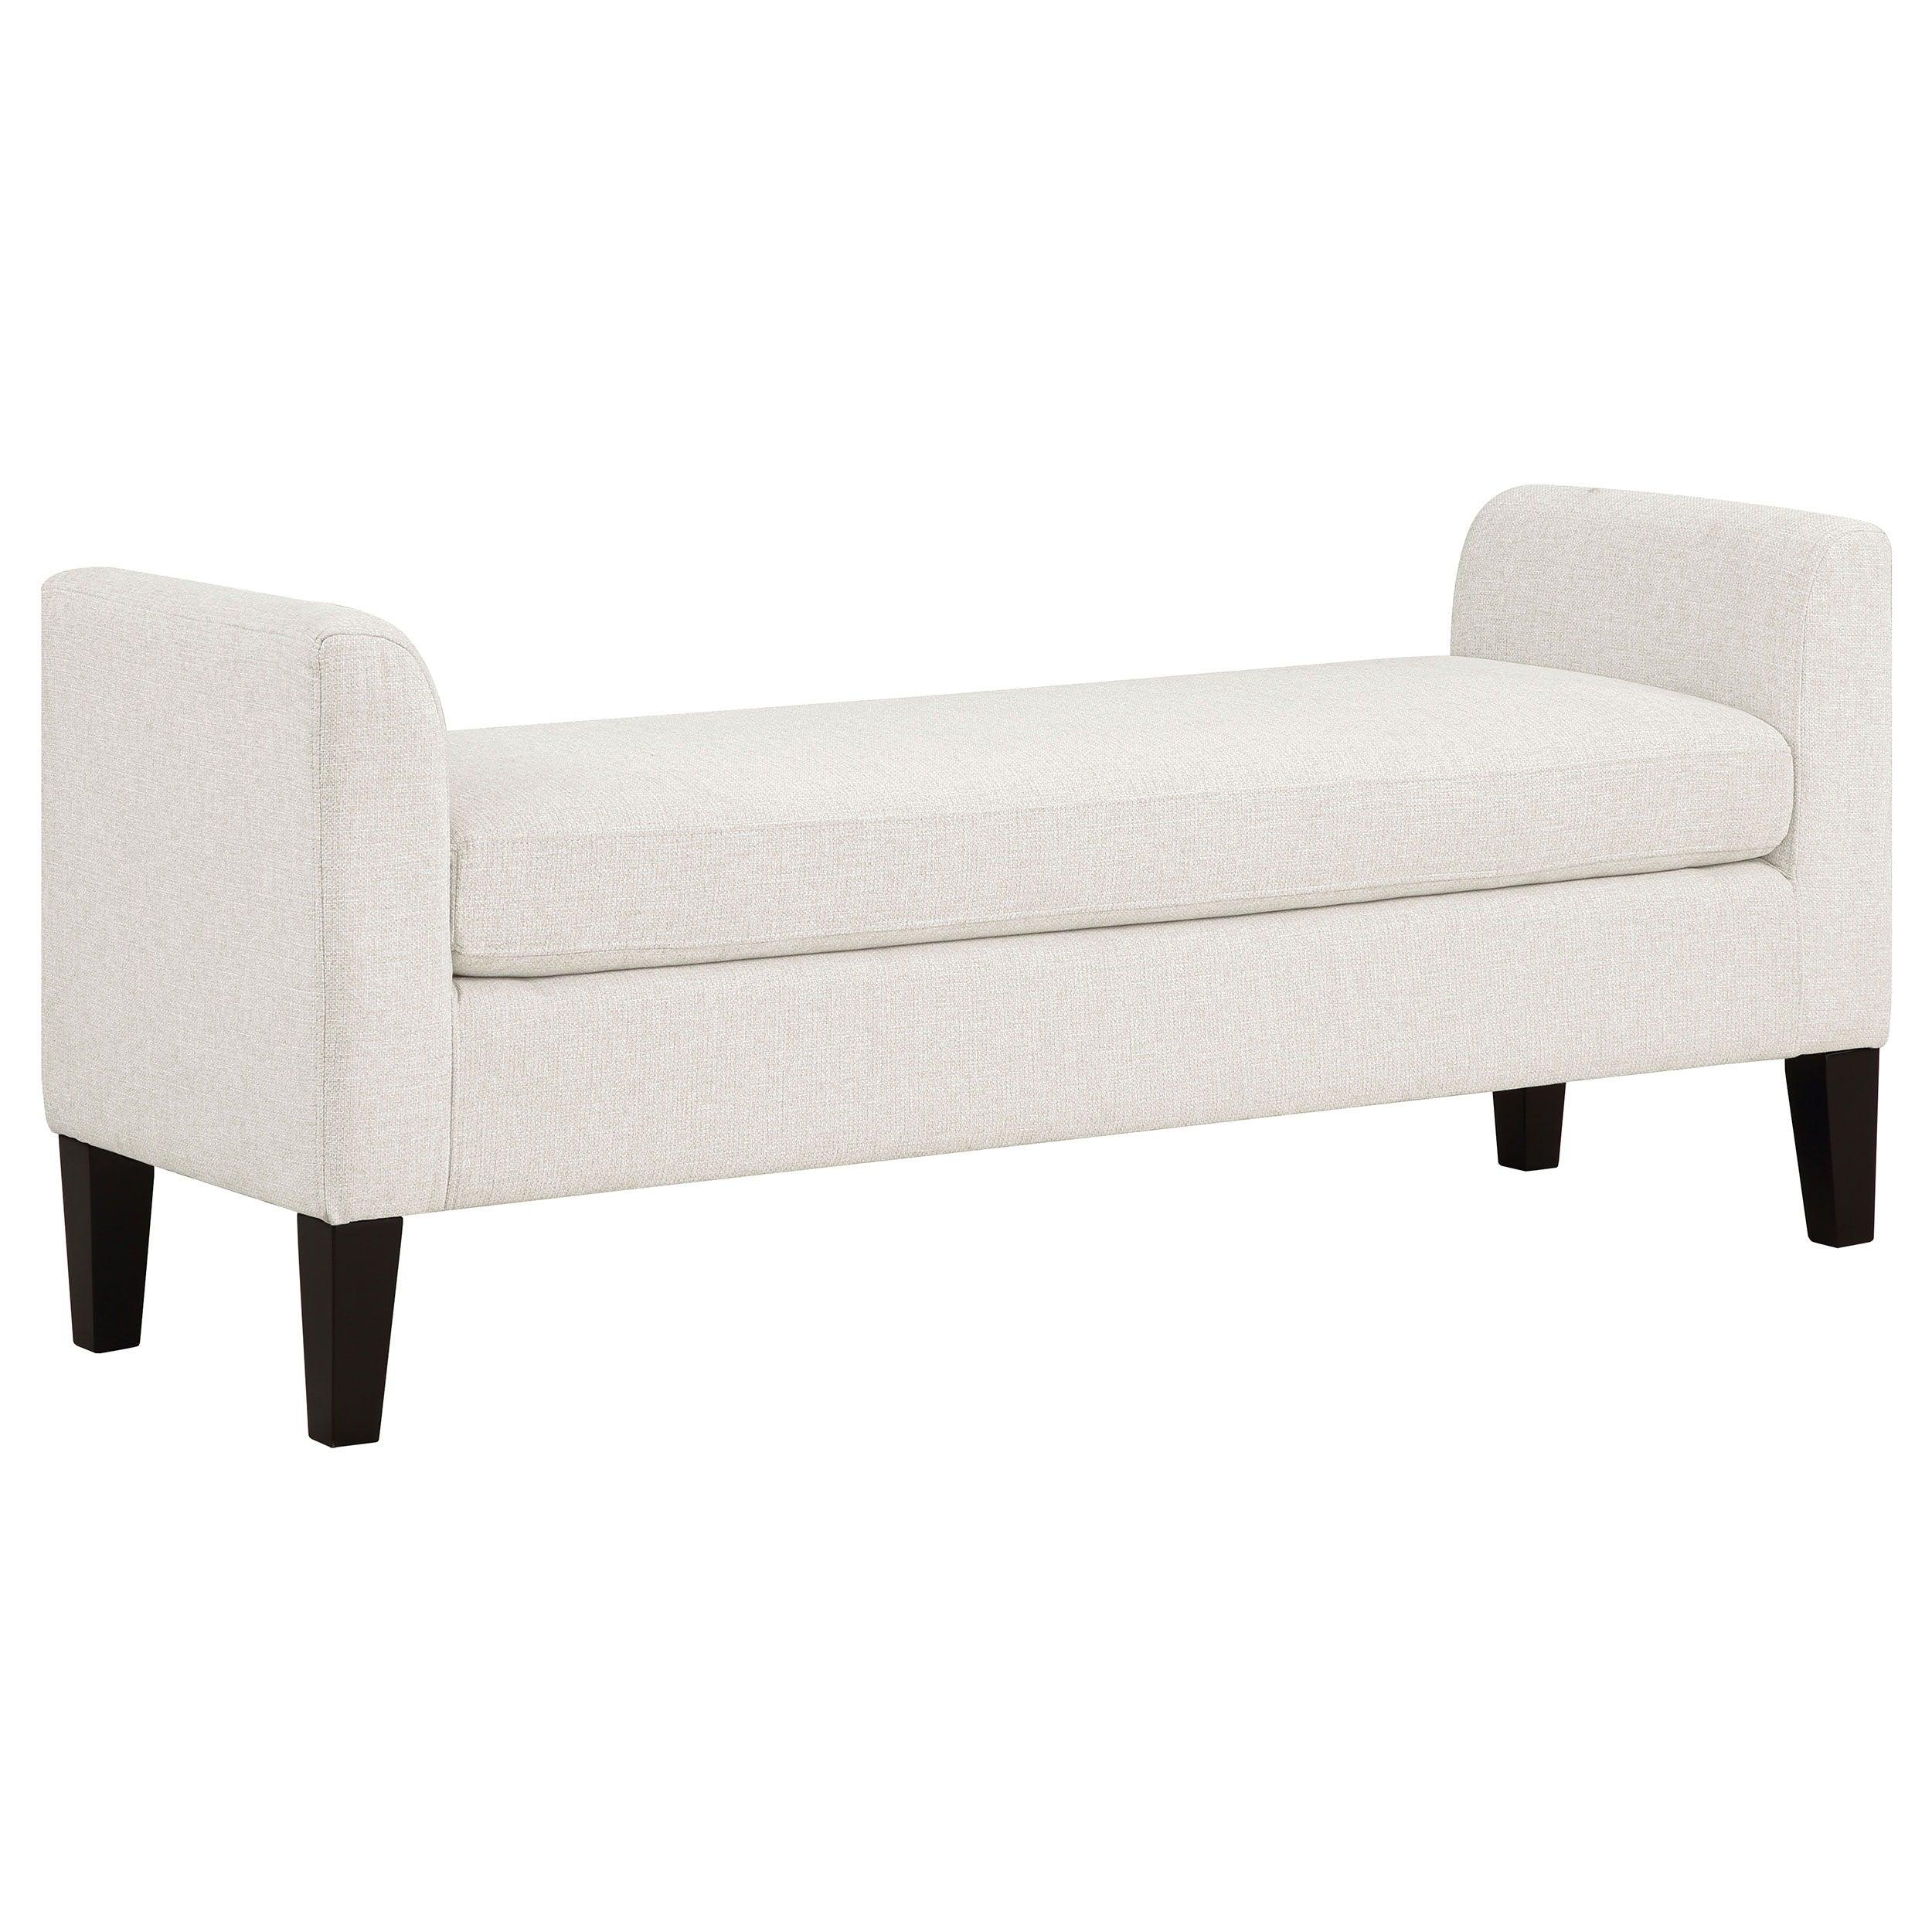 Coaster Fine Furniture - Rex - Upholstered Accent Bench With Raised Arms - Vanilla - 5th Avenue Furniture